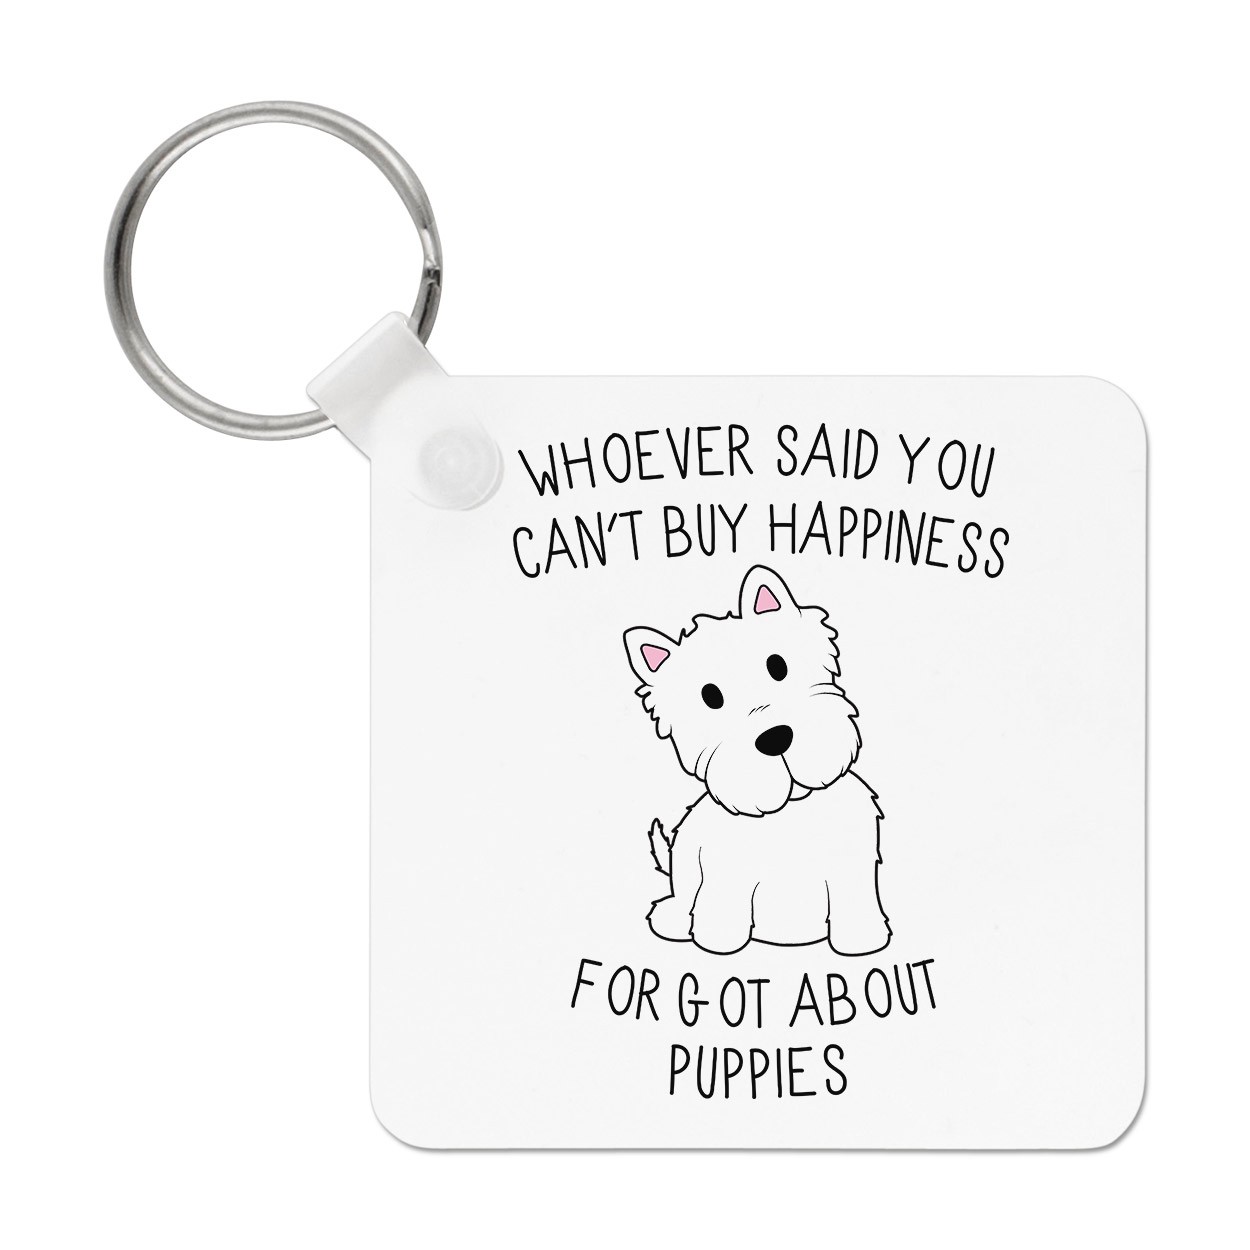 Whoever Said You Can't Buy Happiness Forgot About Puppies Keyring Key Chain